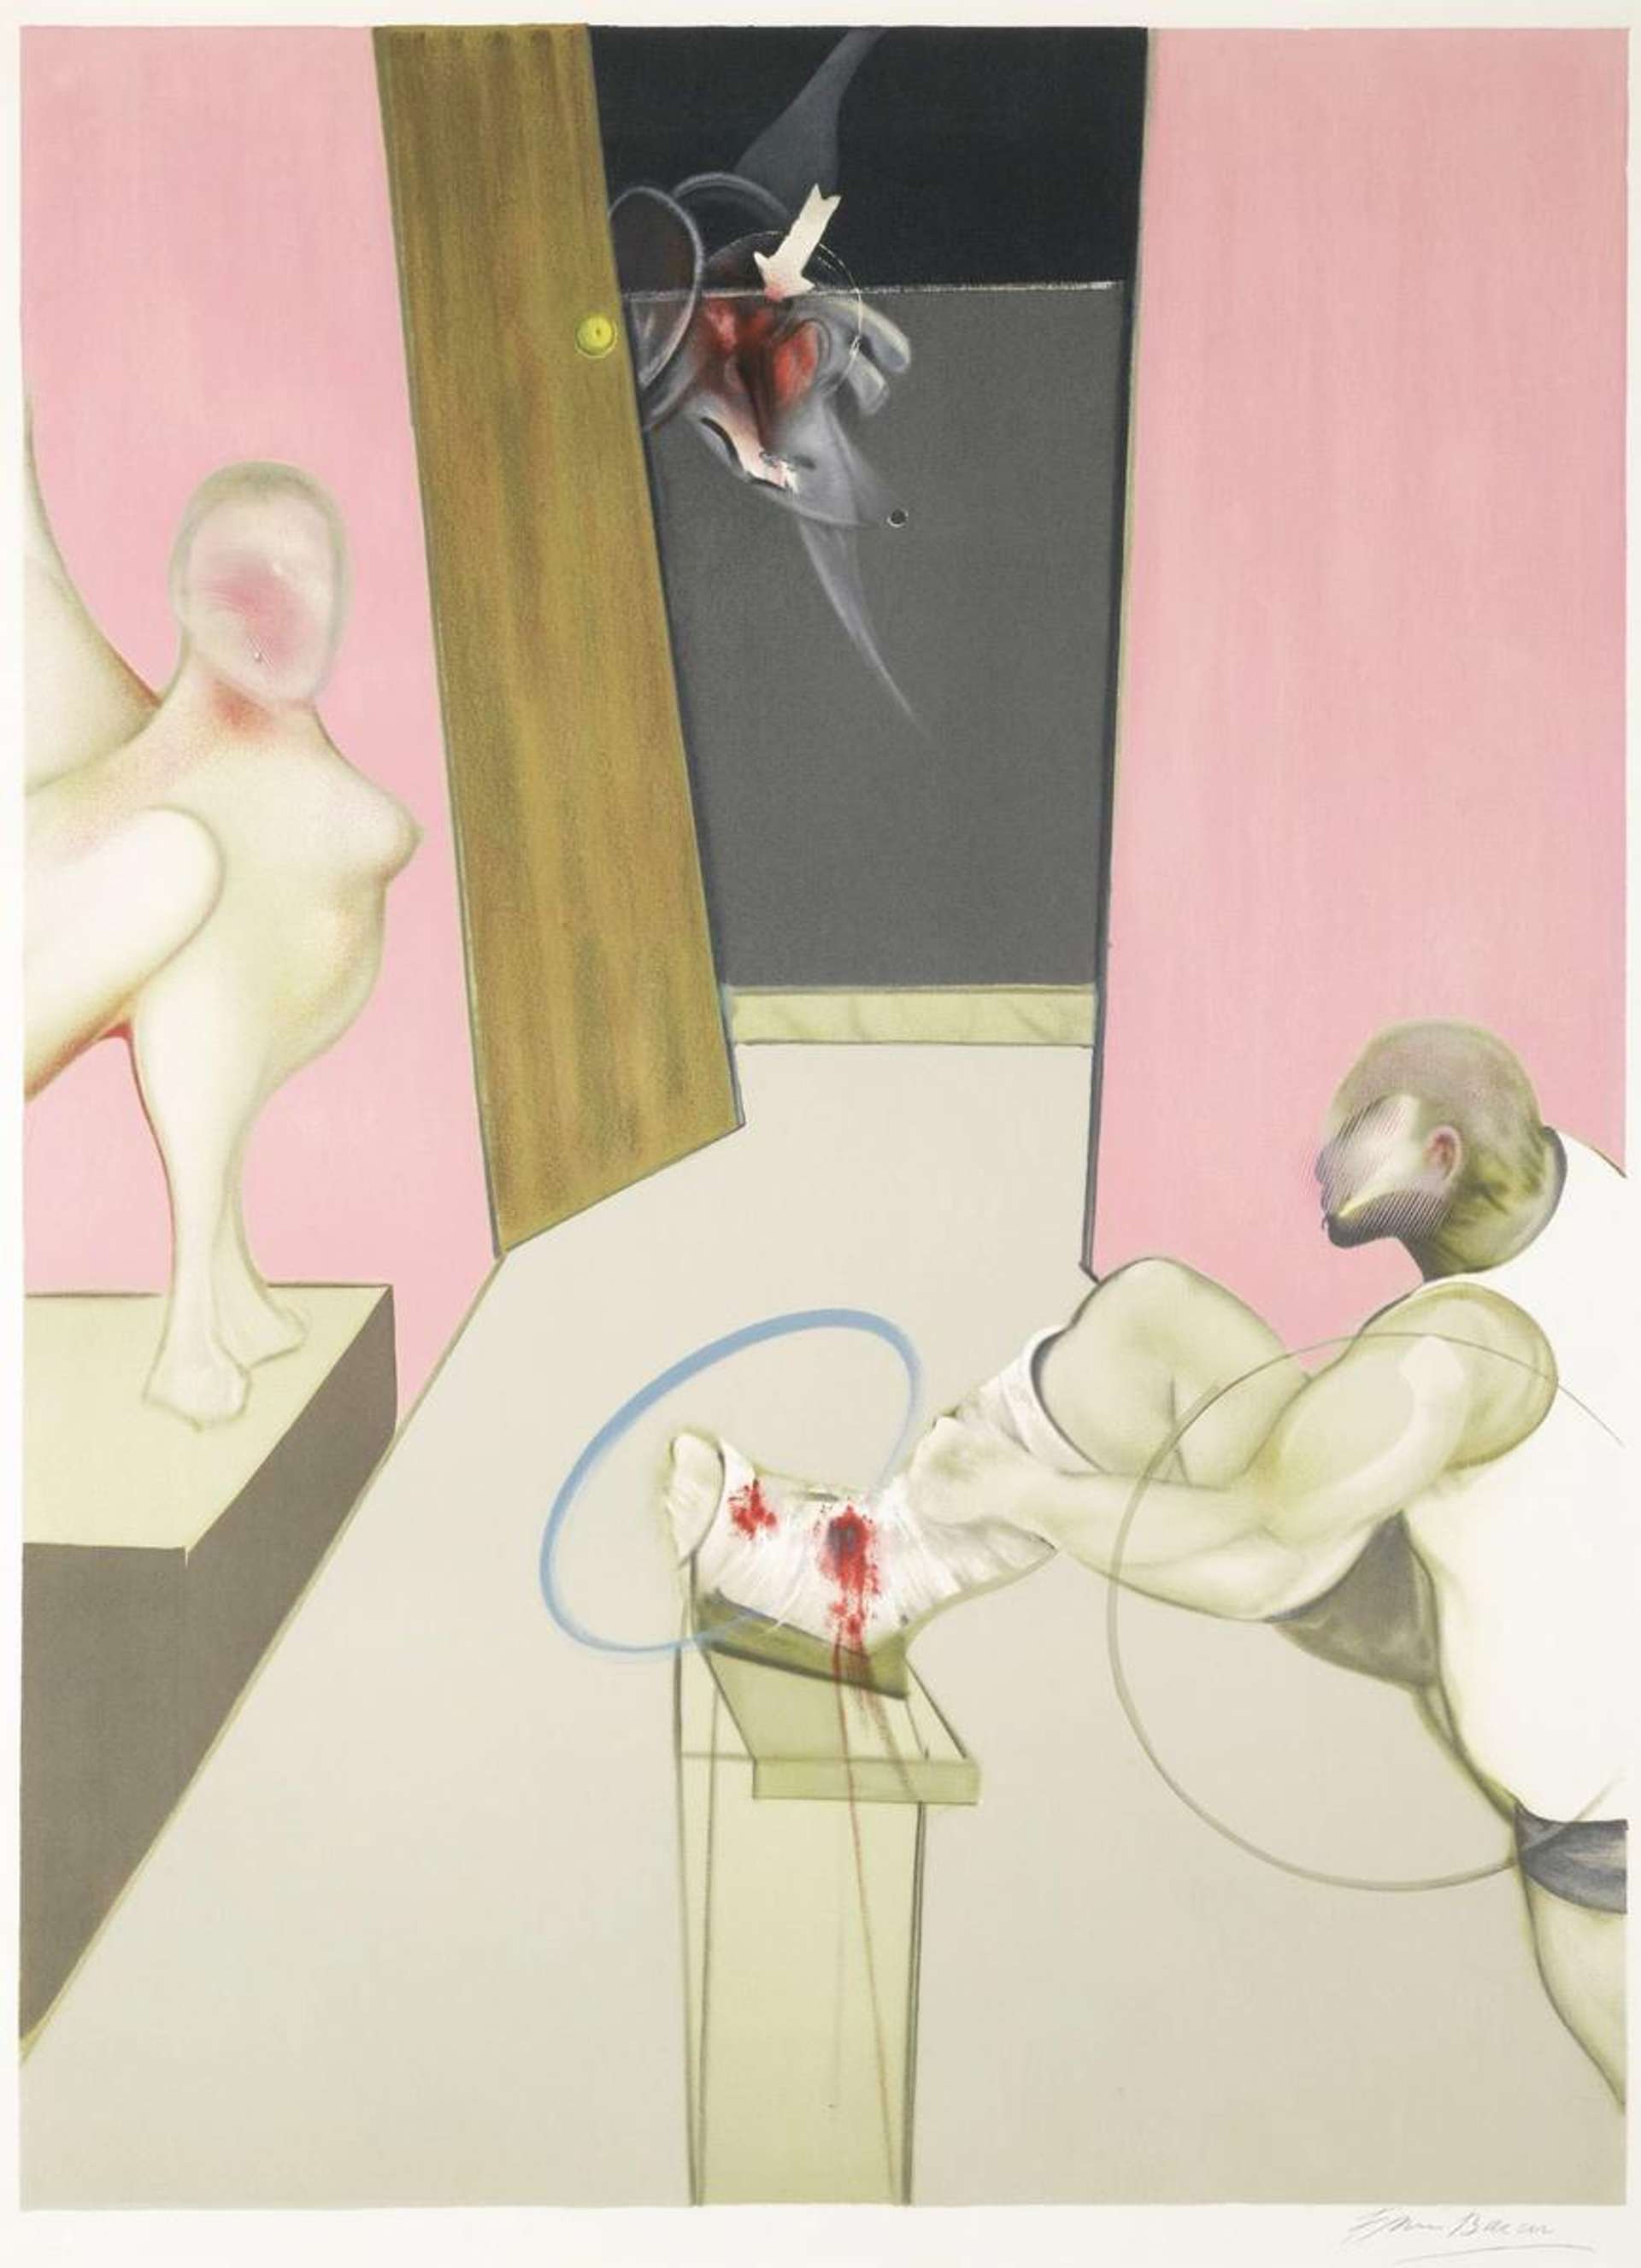 Francis Bacon's Oedipus And The Sphinx. Painting of a sphinx across from Greek mythology figure Oedipus with an injured foot.